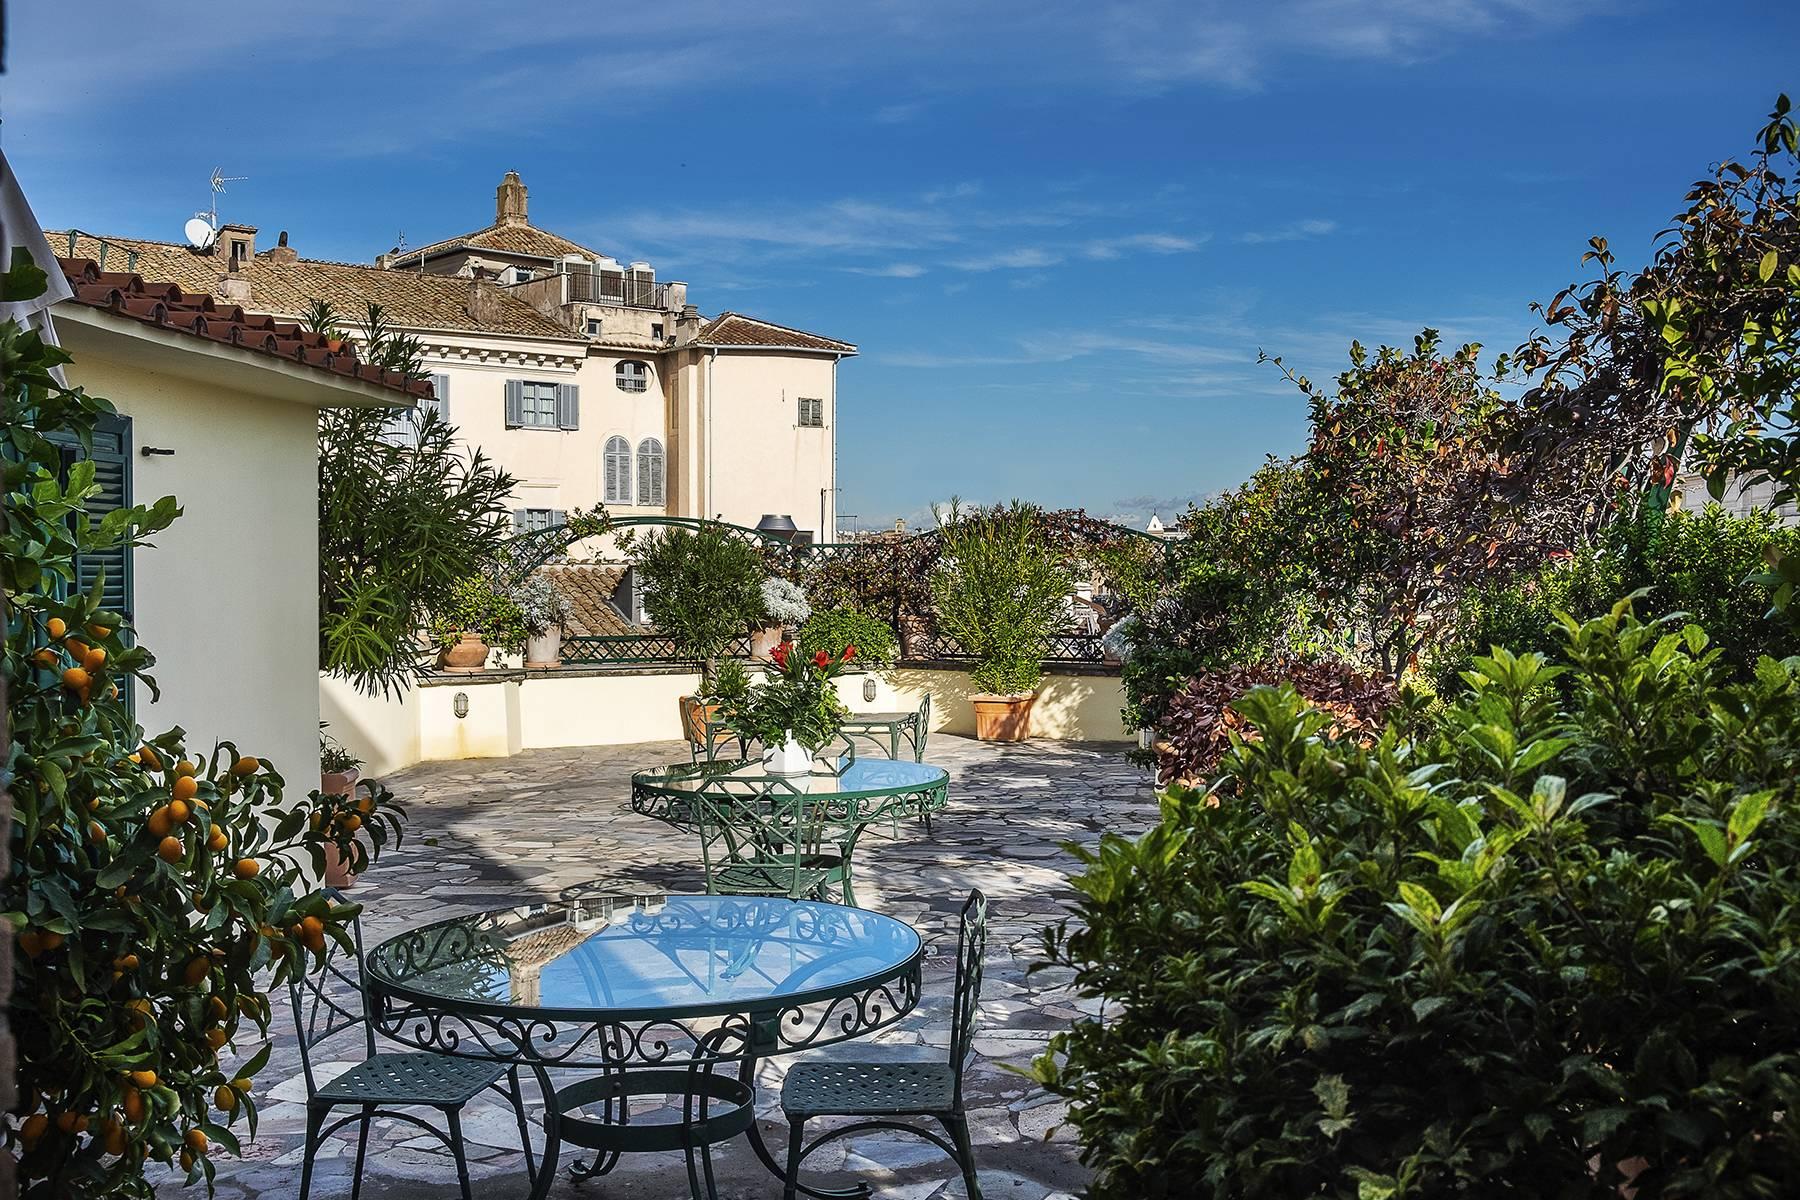 Fascinating penthouse with terraces a few steps from the Quirinale - 1